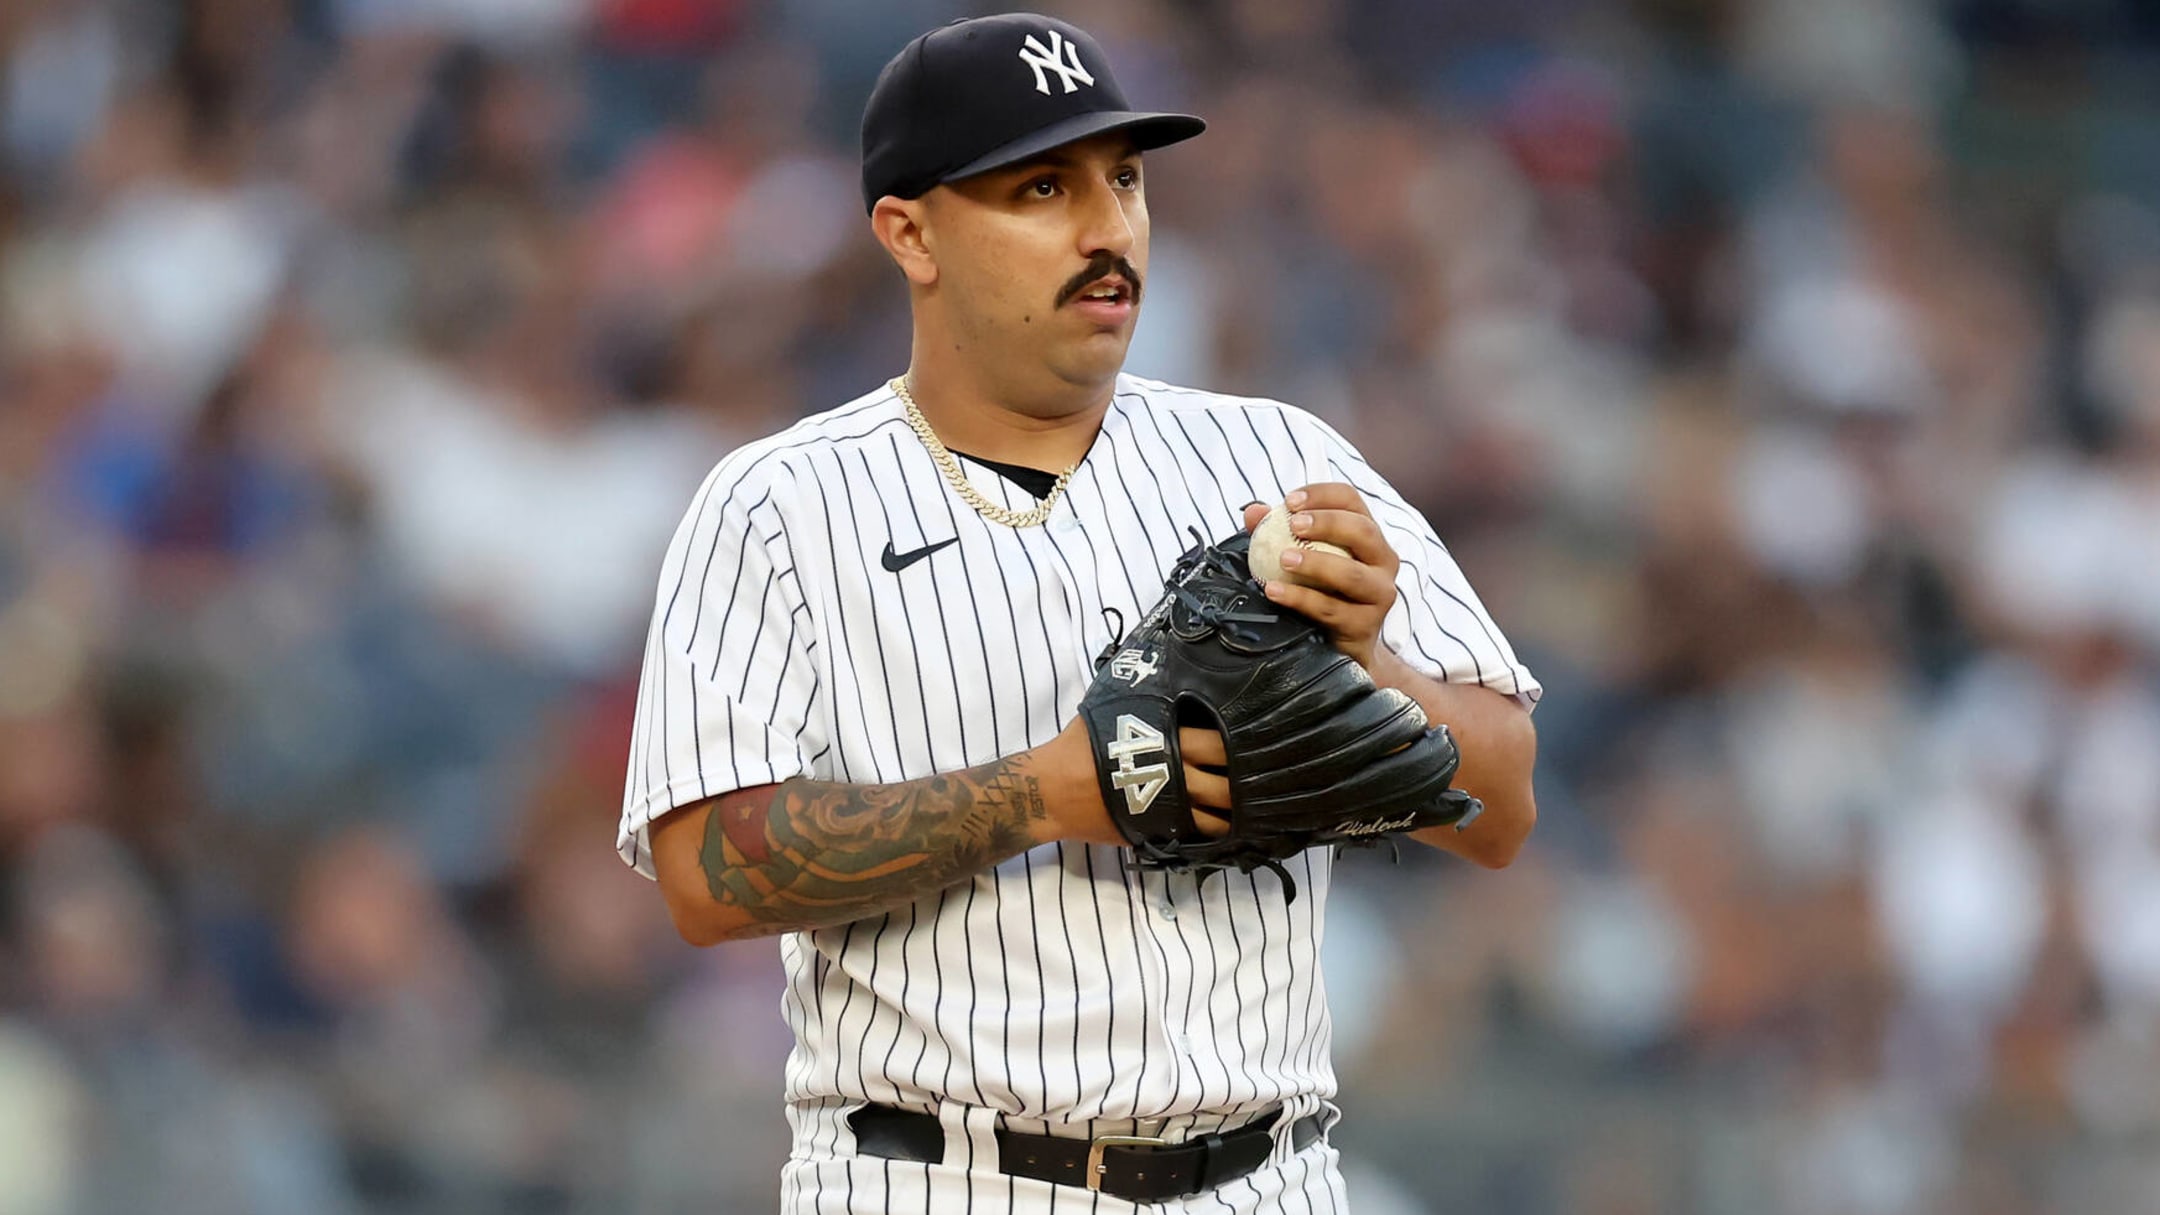 Yankees lefty Nestor Cortes' learning curve getting him to head of